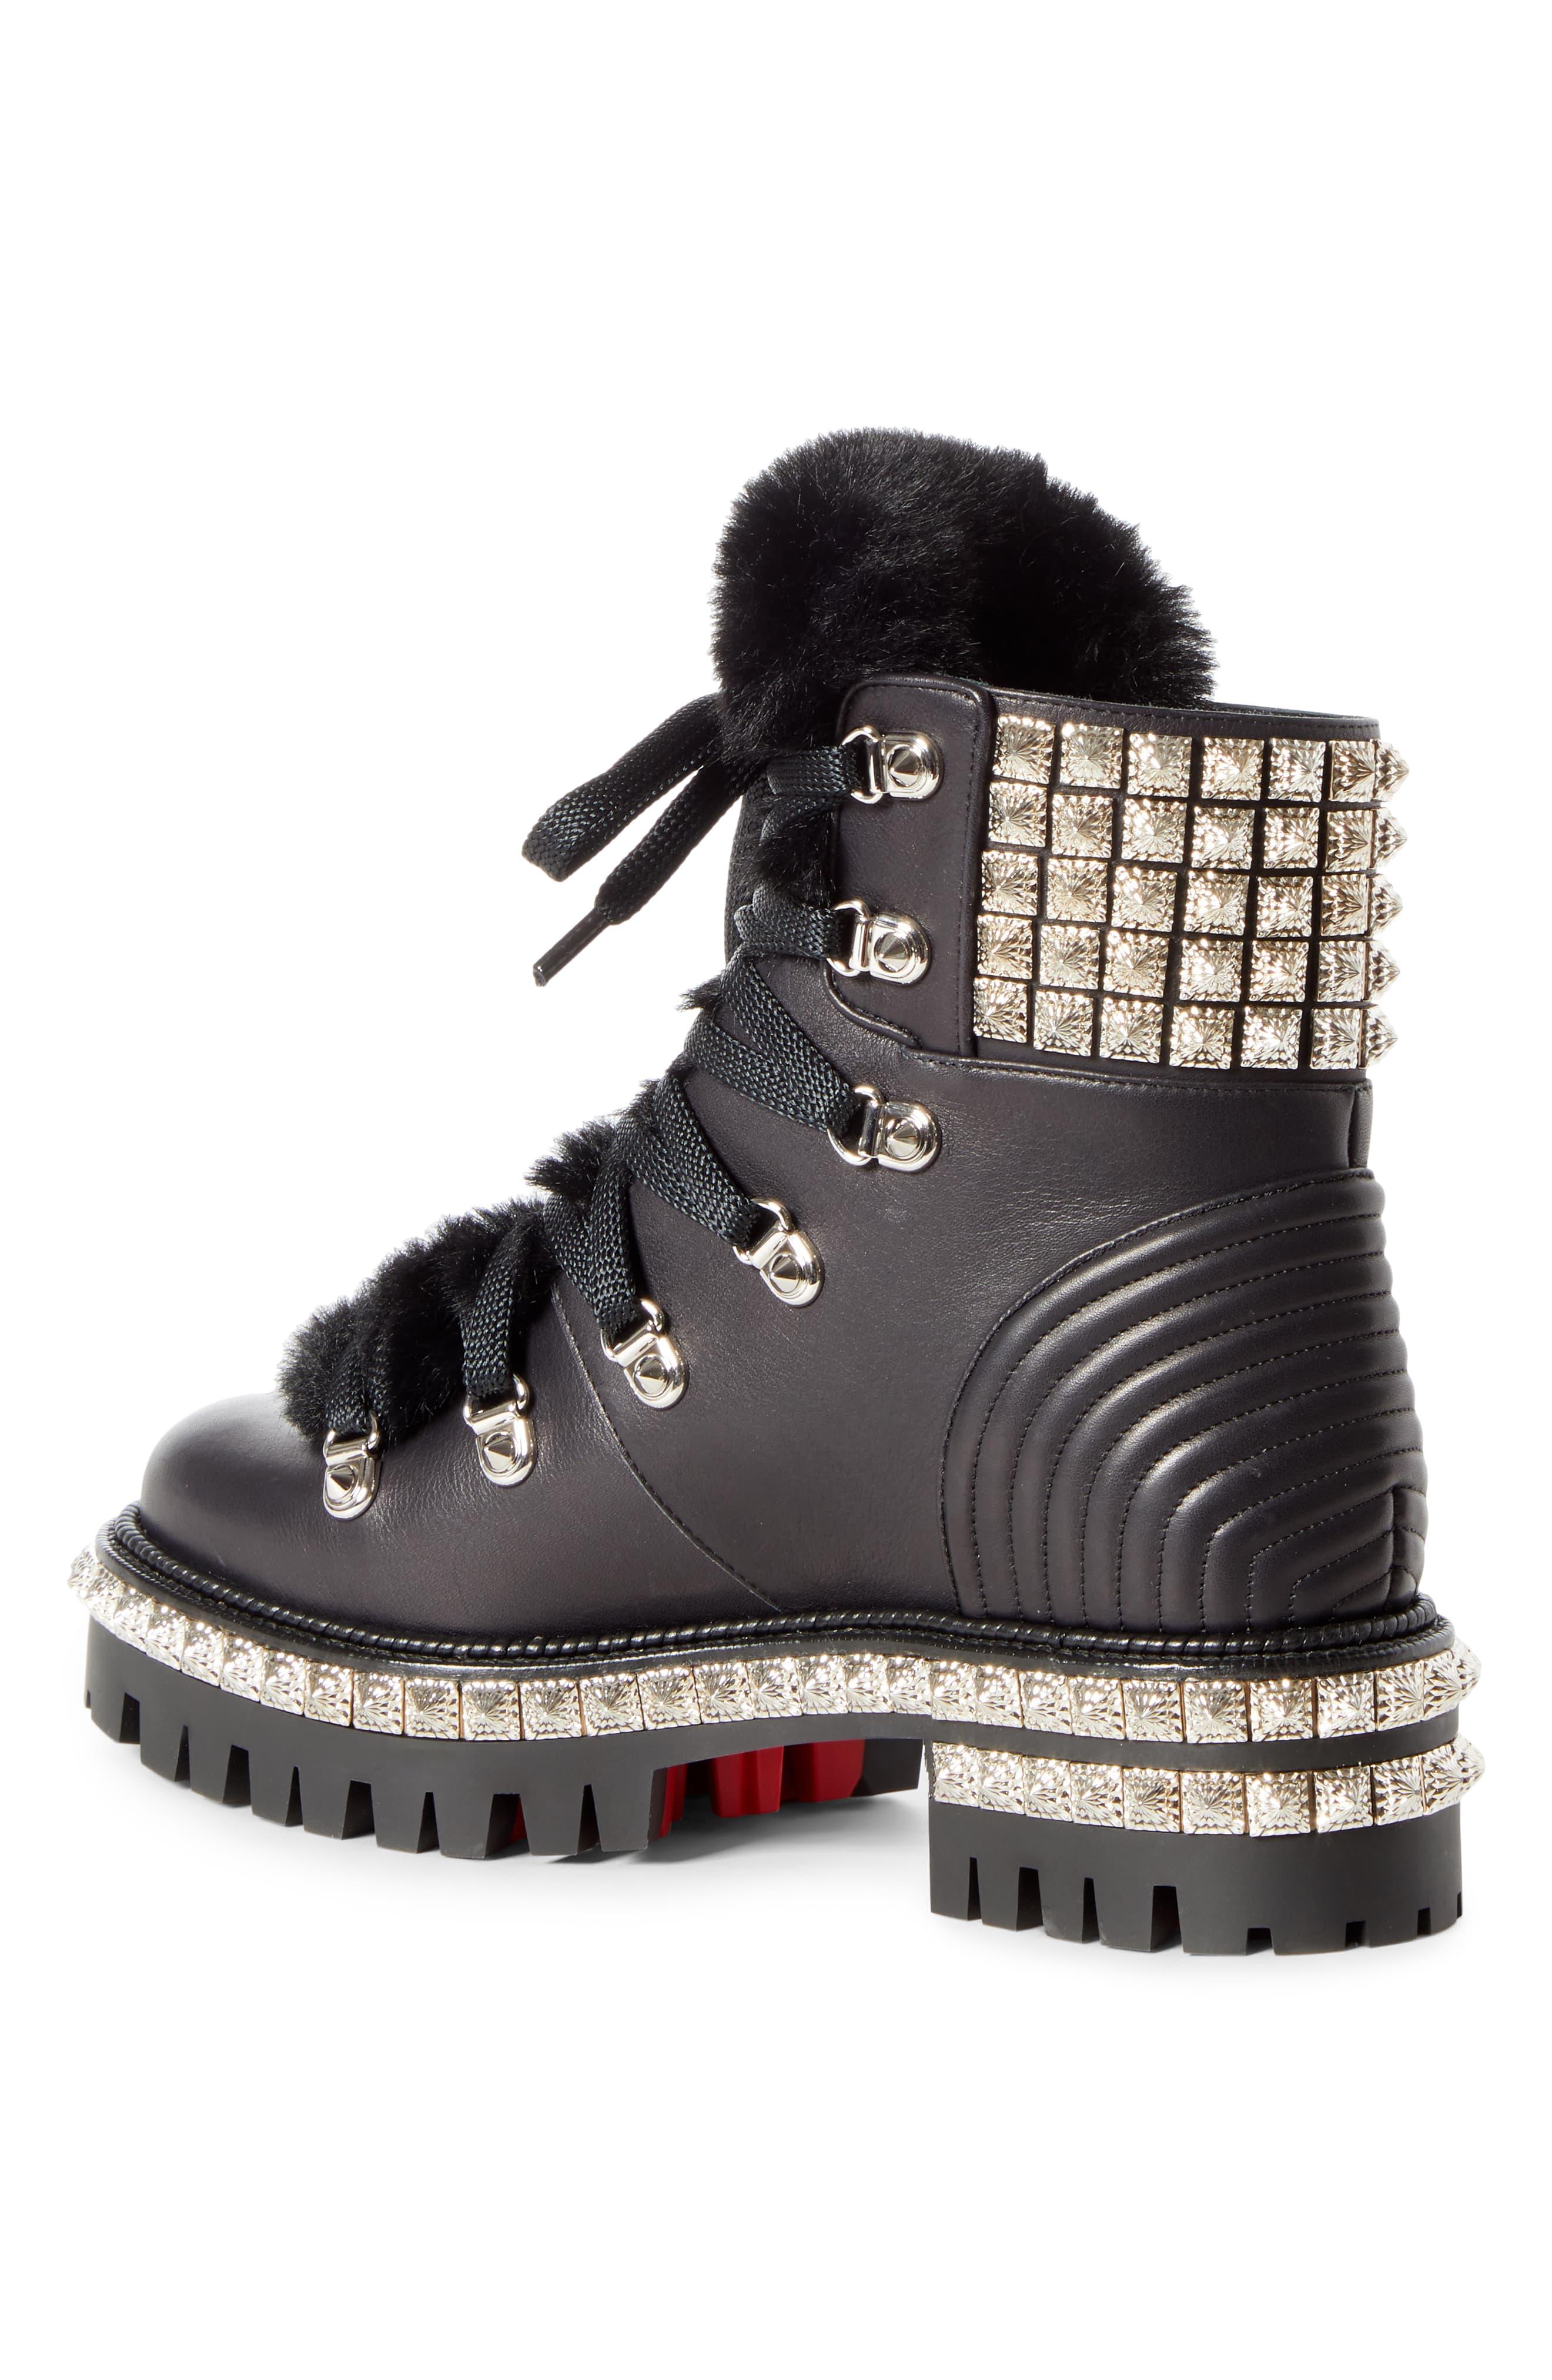 studded hiking boots